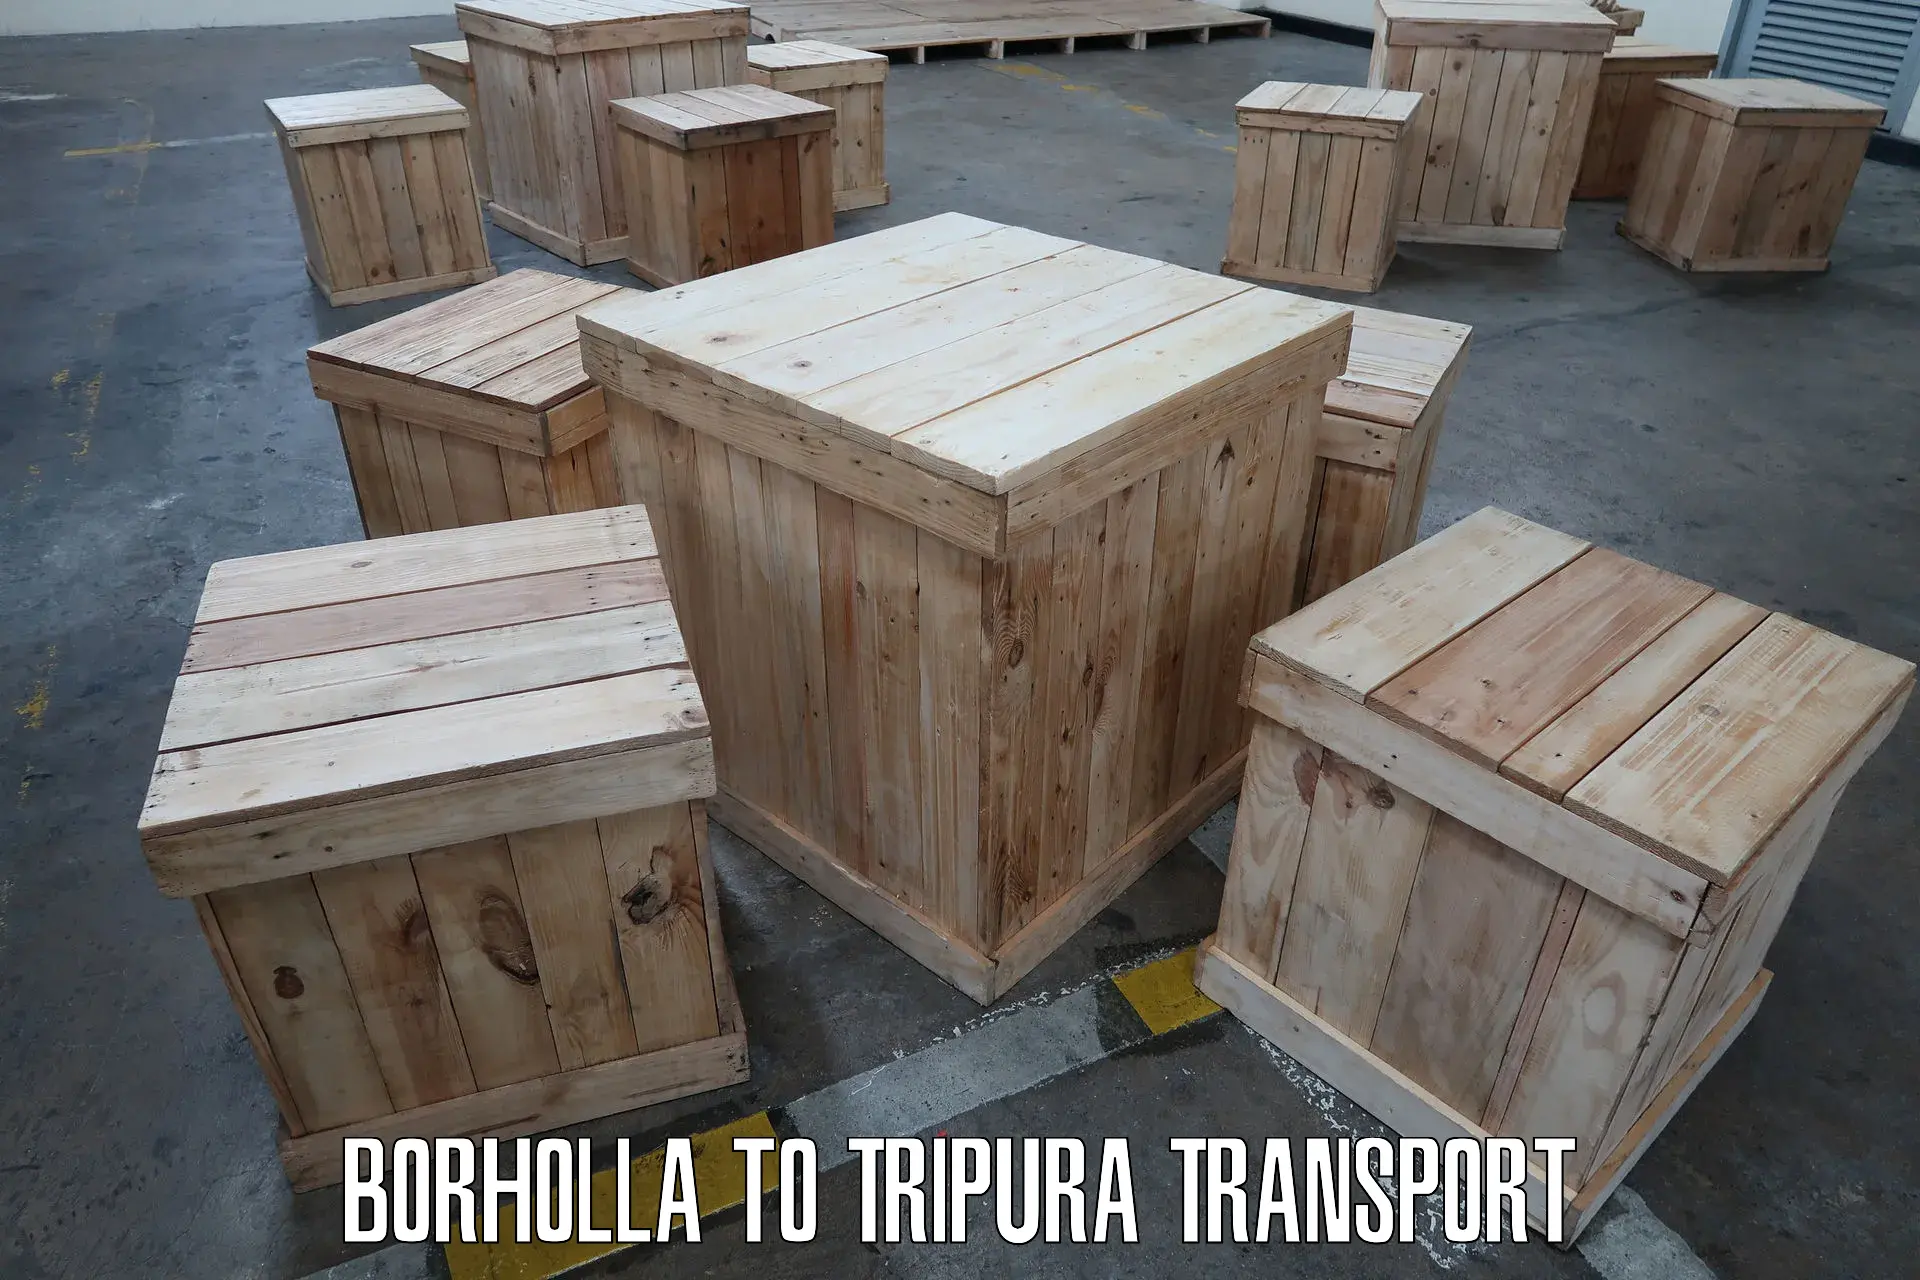 Express transport services Borholla to Udaipur Tripura